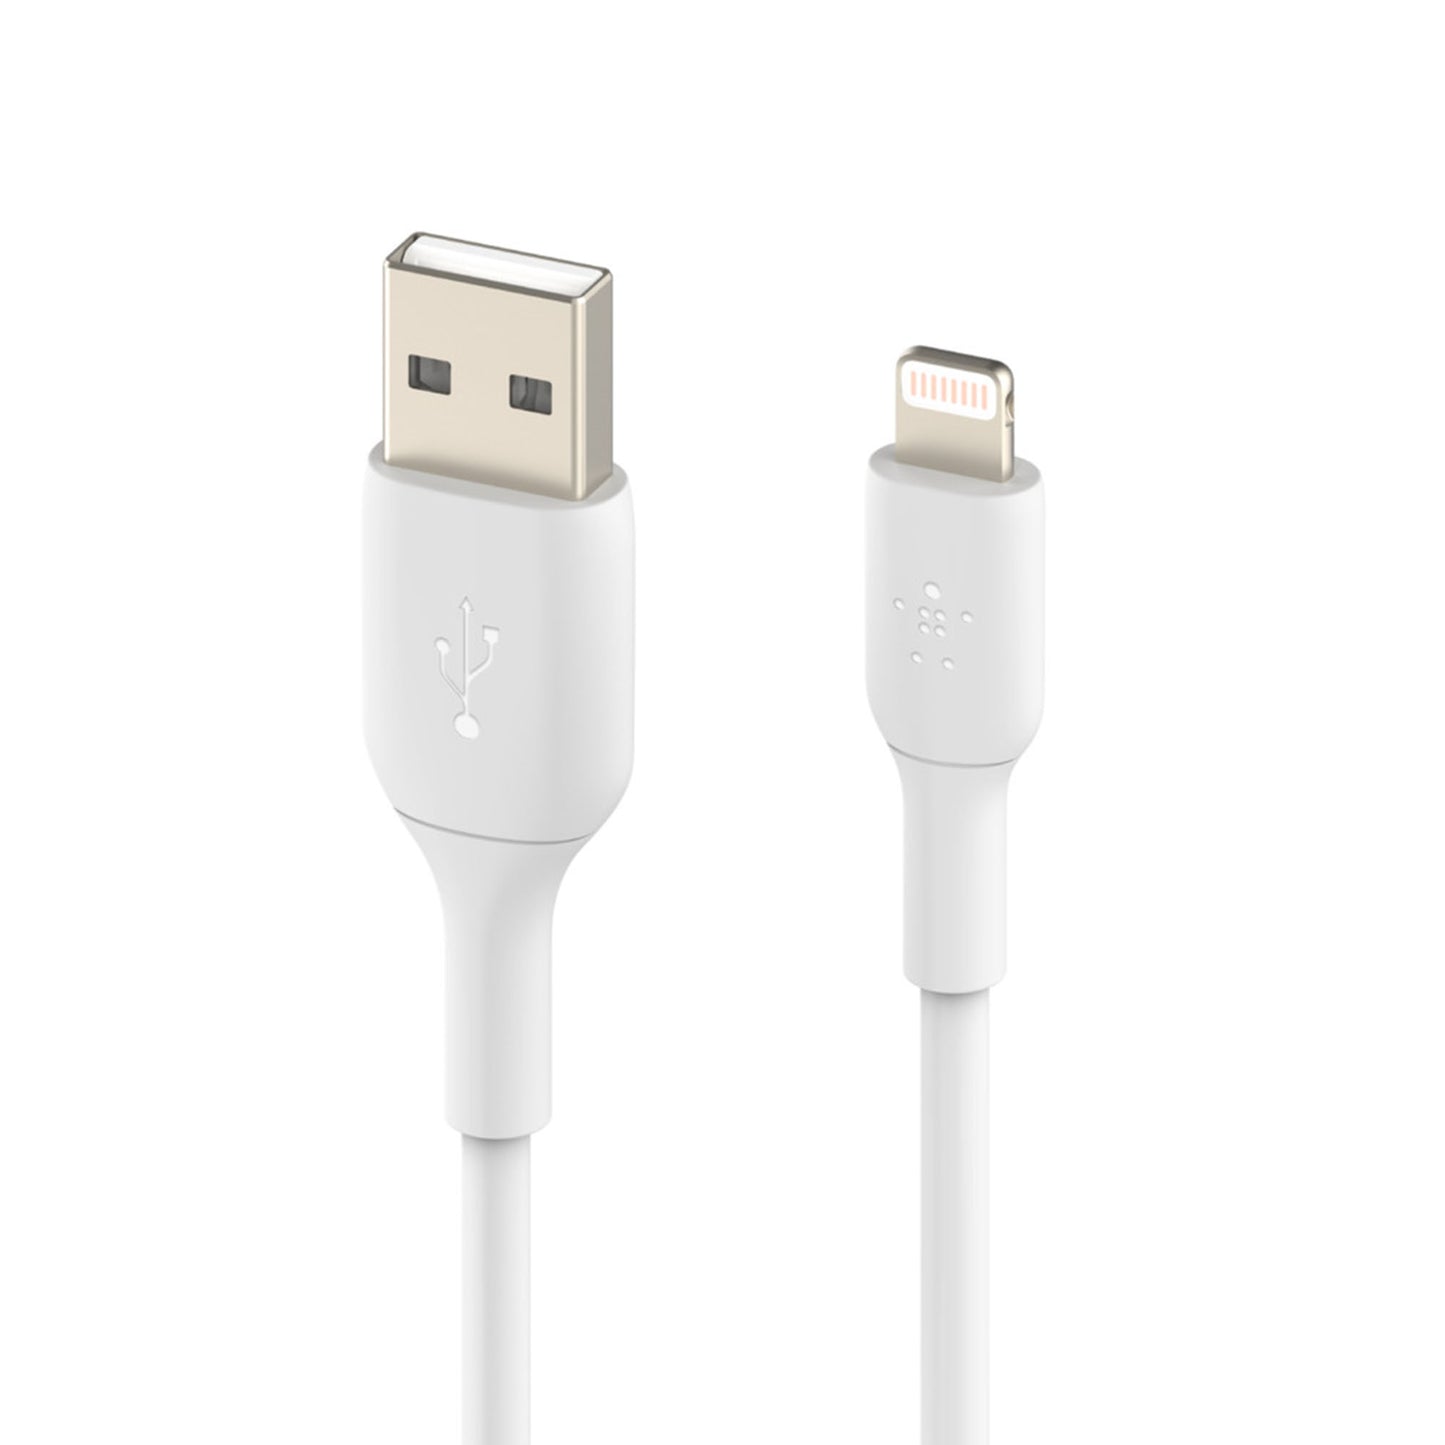 BELKIN BoostUp Charge Lightning Cable 3m - White